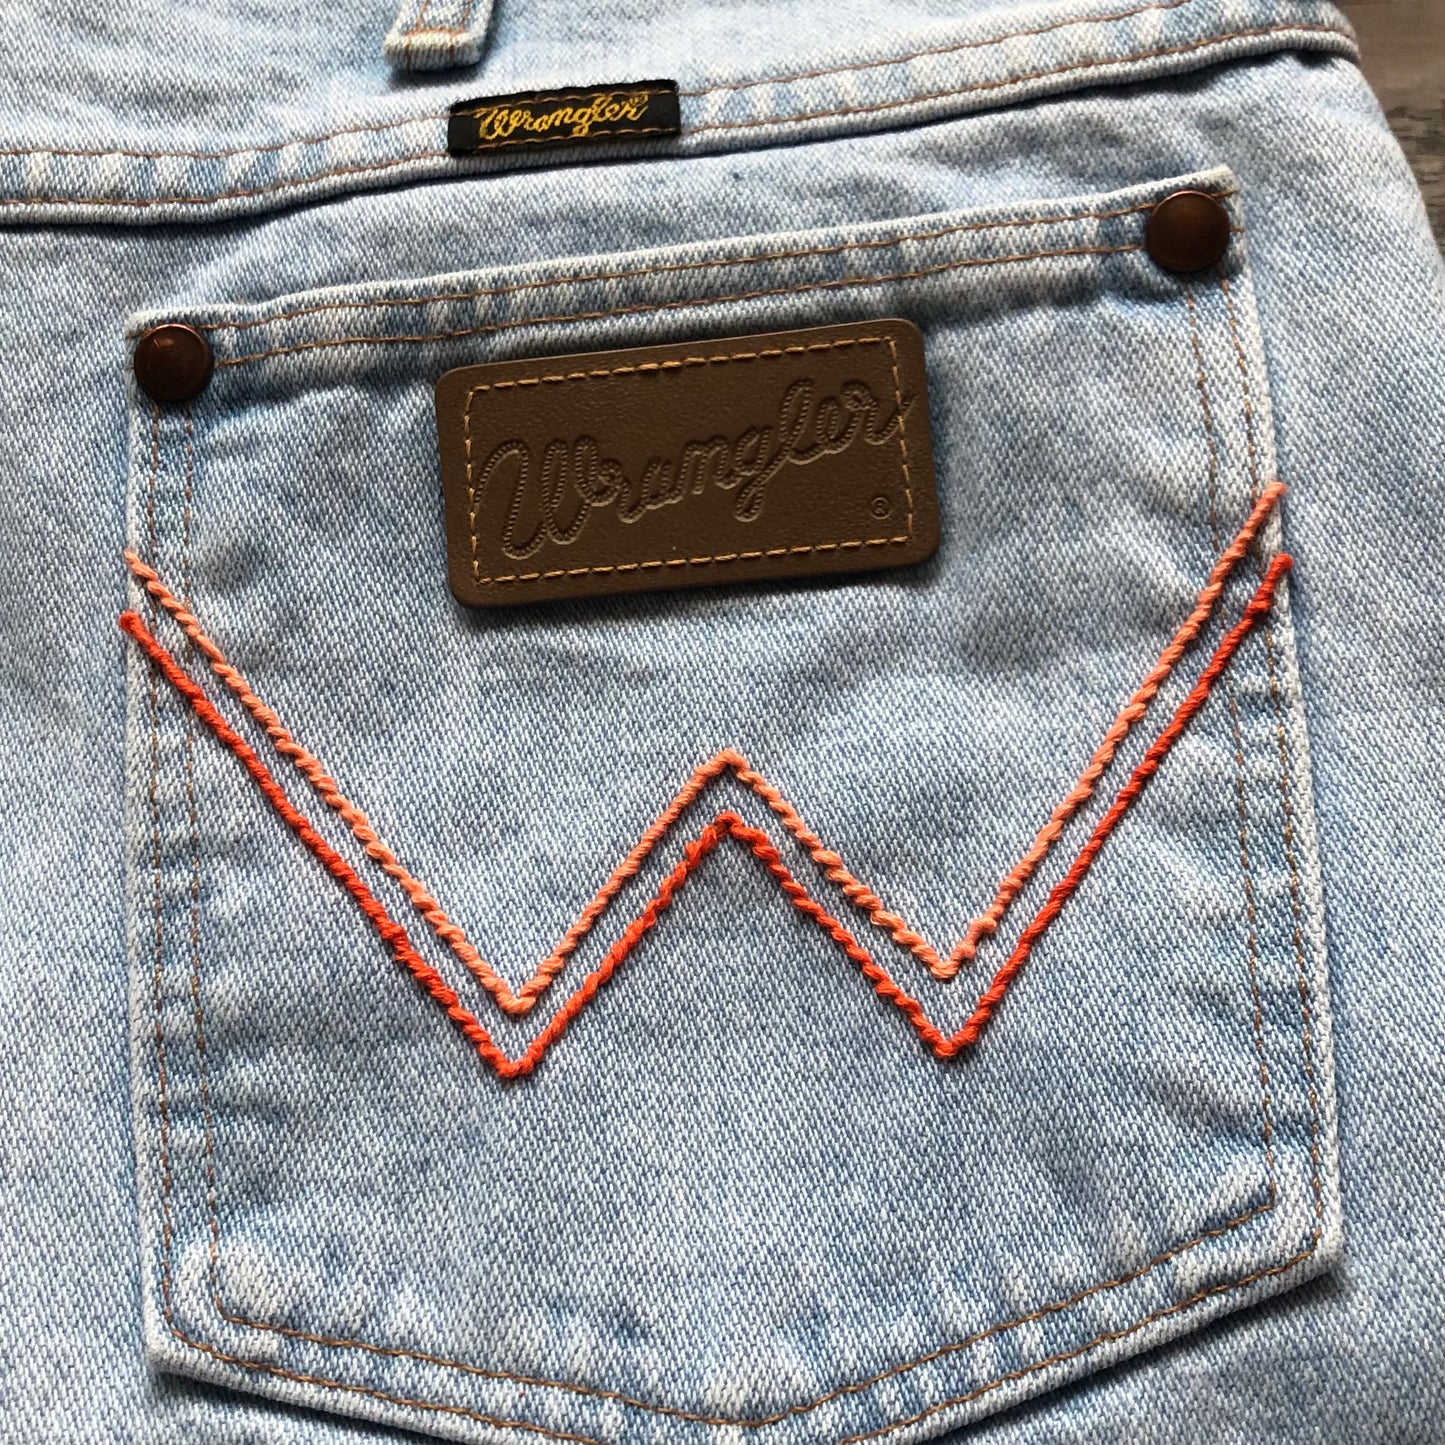 80’s Vintage Western Wrangler Light Wash Jeans with A Pop of Color Embroidery | Made in USA